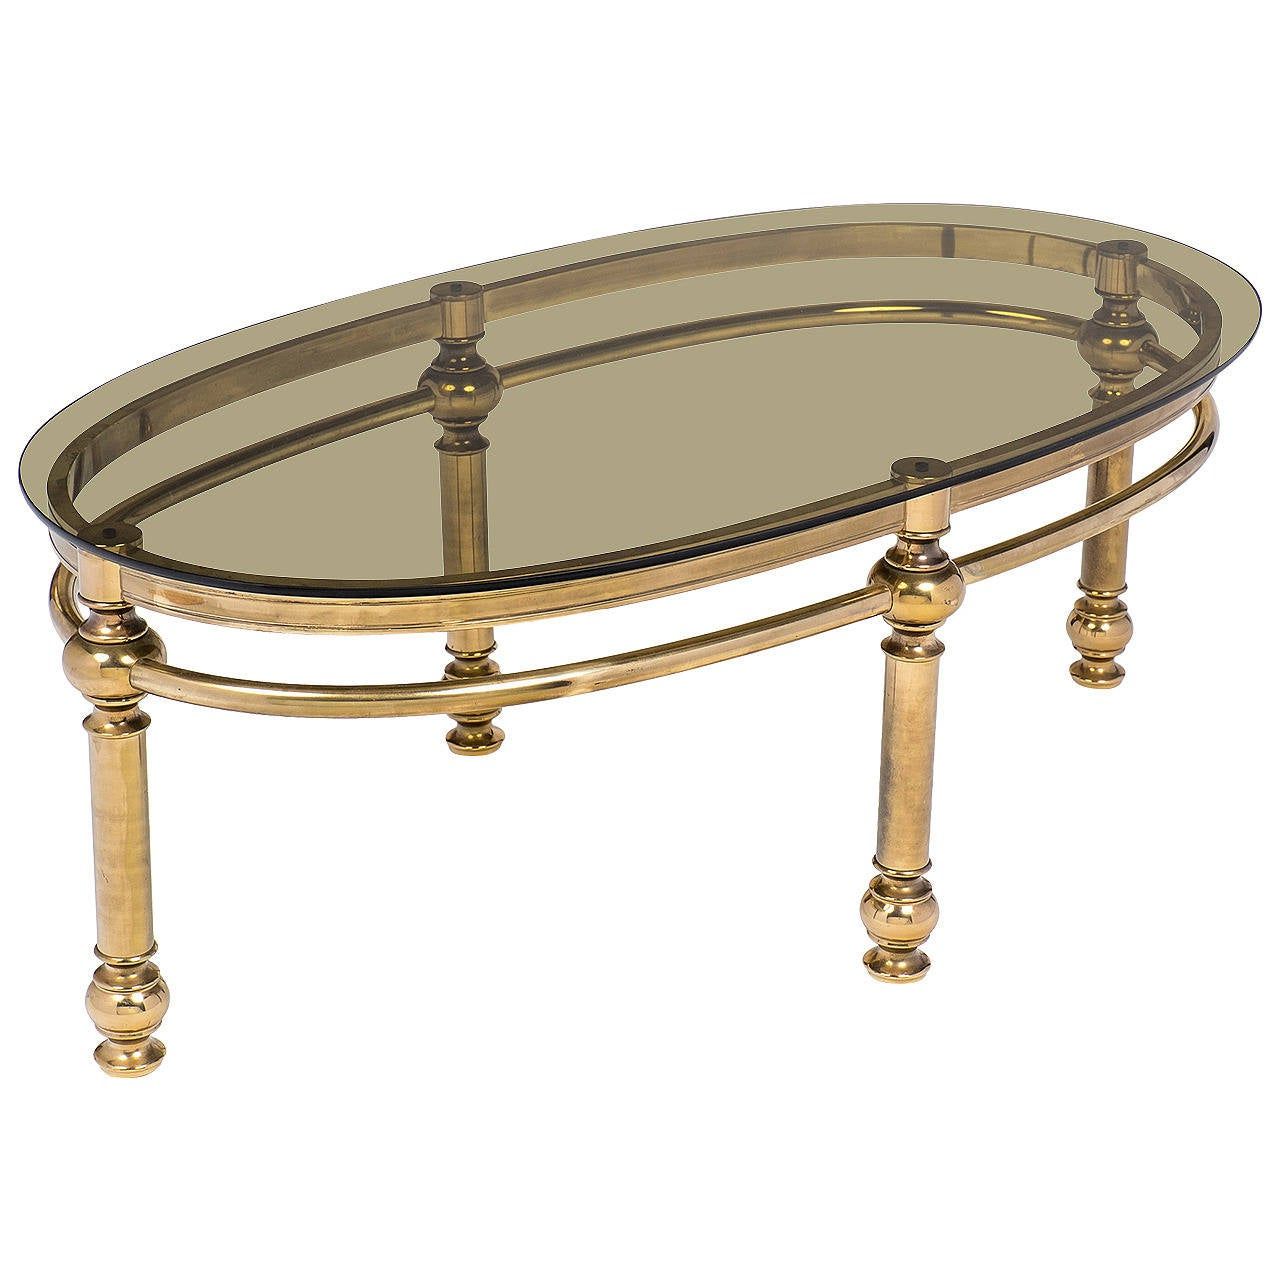 Most Recently Released French Vintage Brass Coffee Table At 1stdibs Inside Antique Brass Aluminum Round Coffee Tables (View 3 of 10)